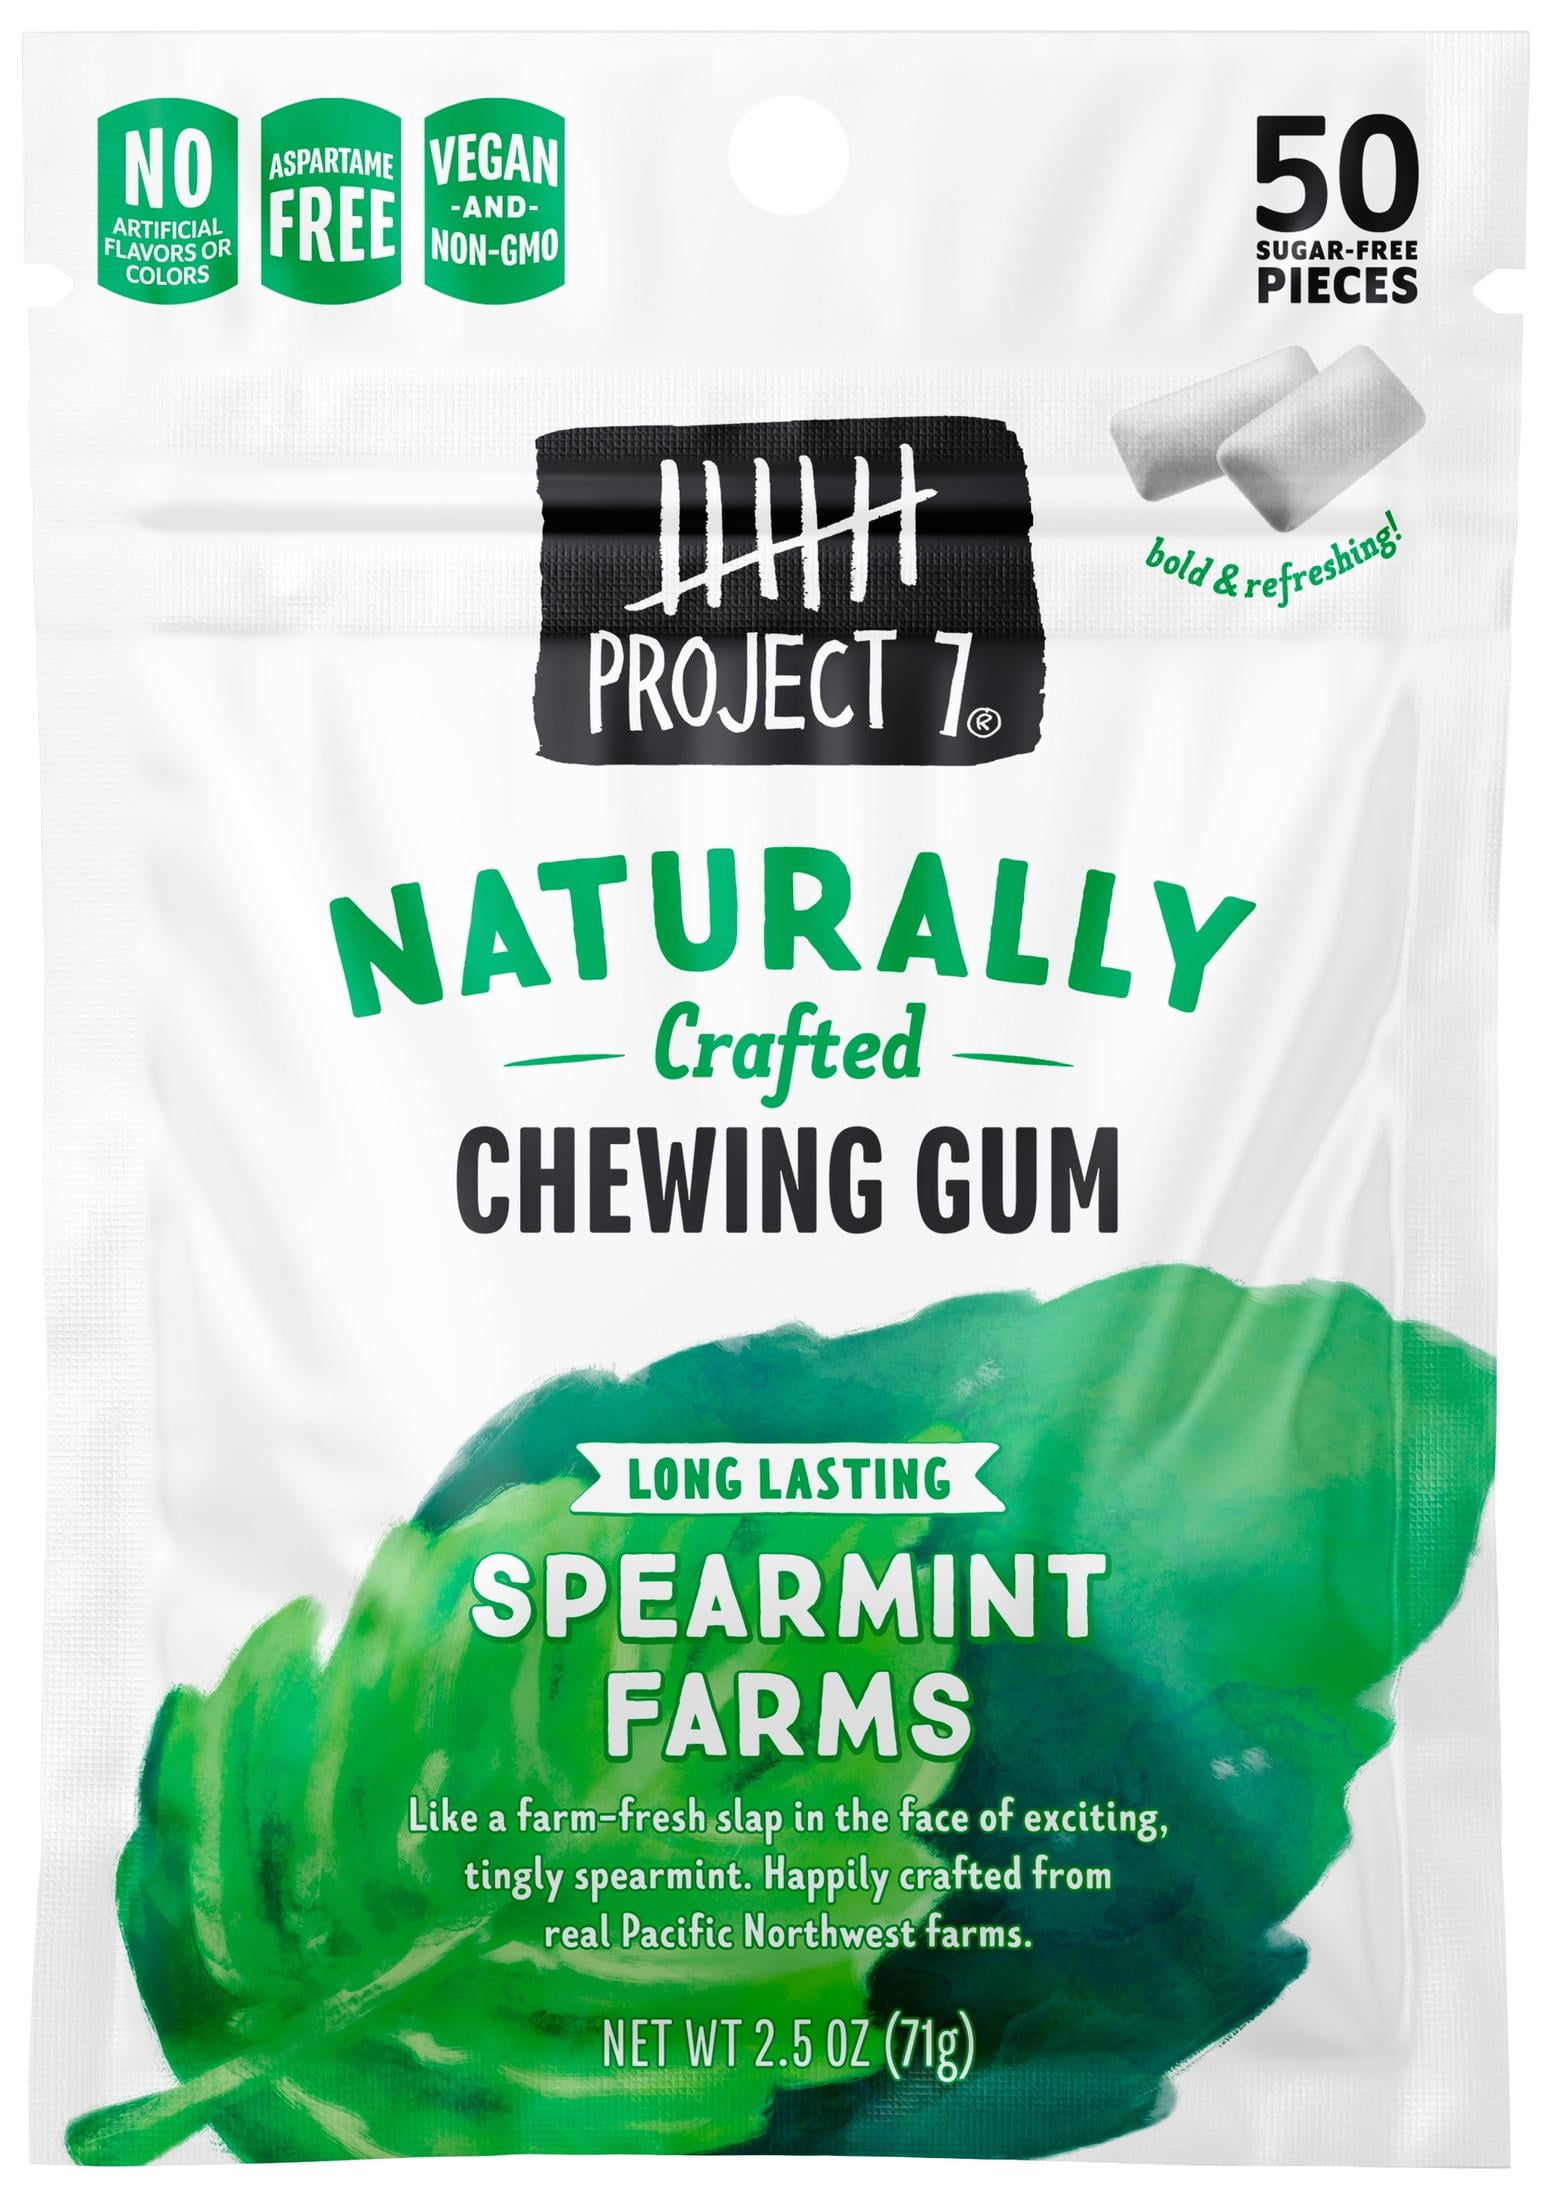 Project 7 Spearmint Farms Sugar Free Chewing Gum, 50 Pieces